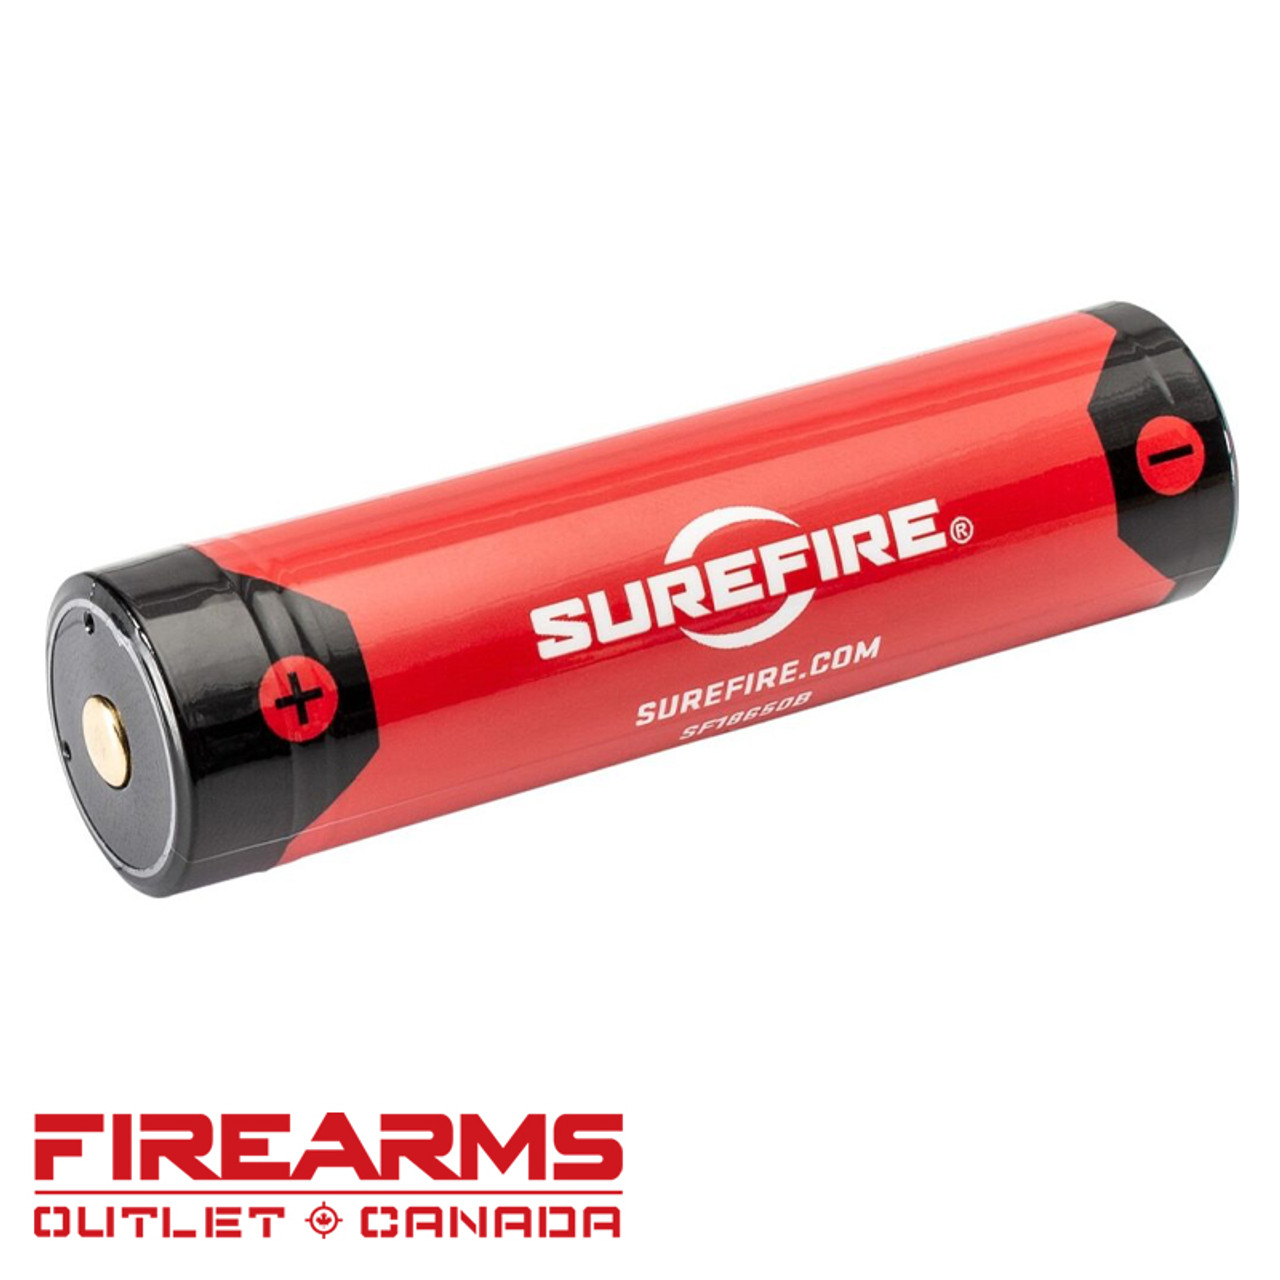 SureFire Micro USB Lithium Ion Rechargeable Battery [SF18650B]